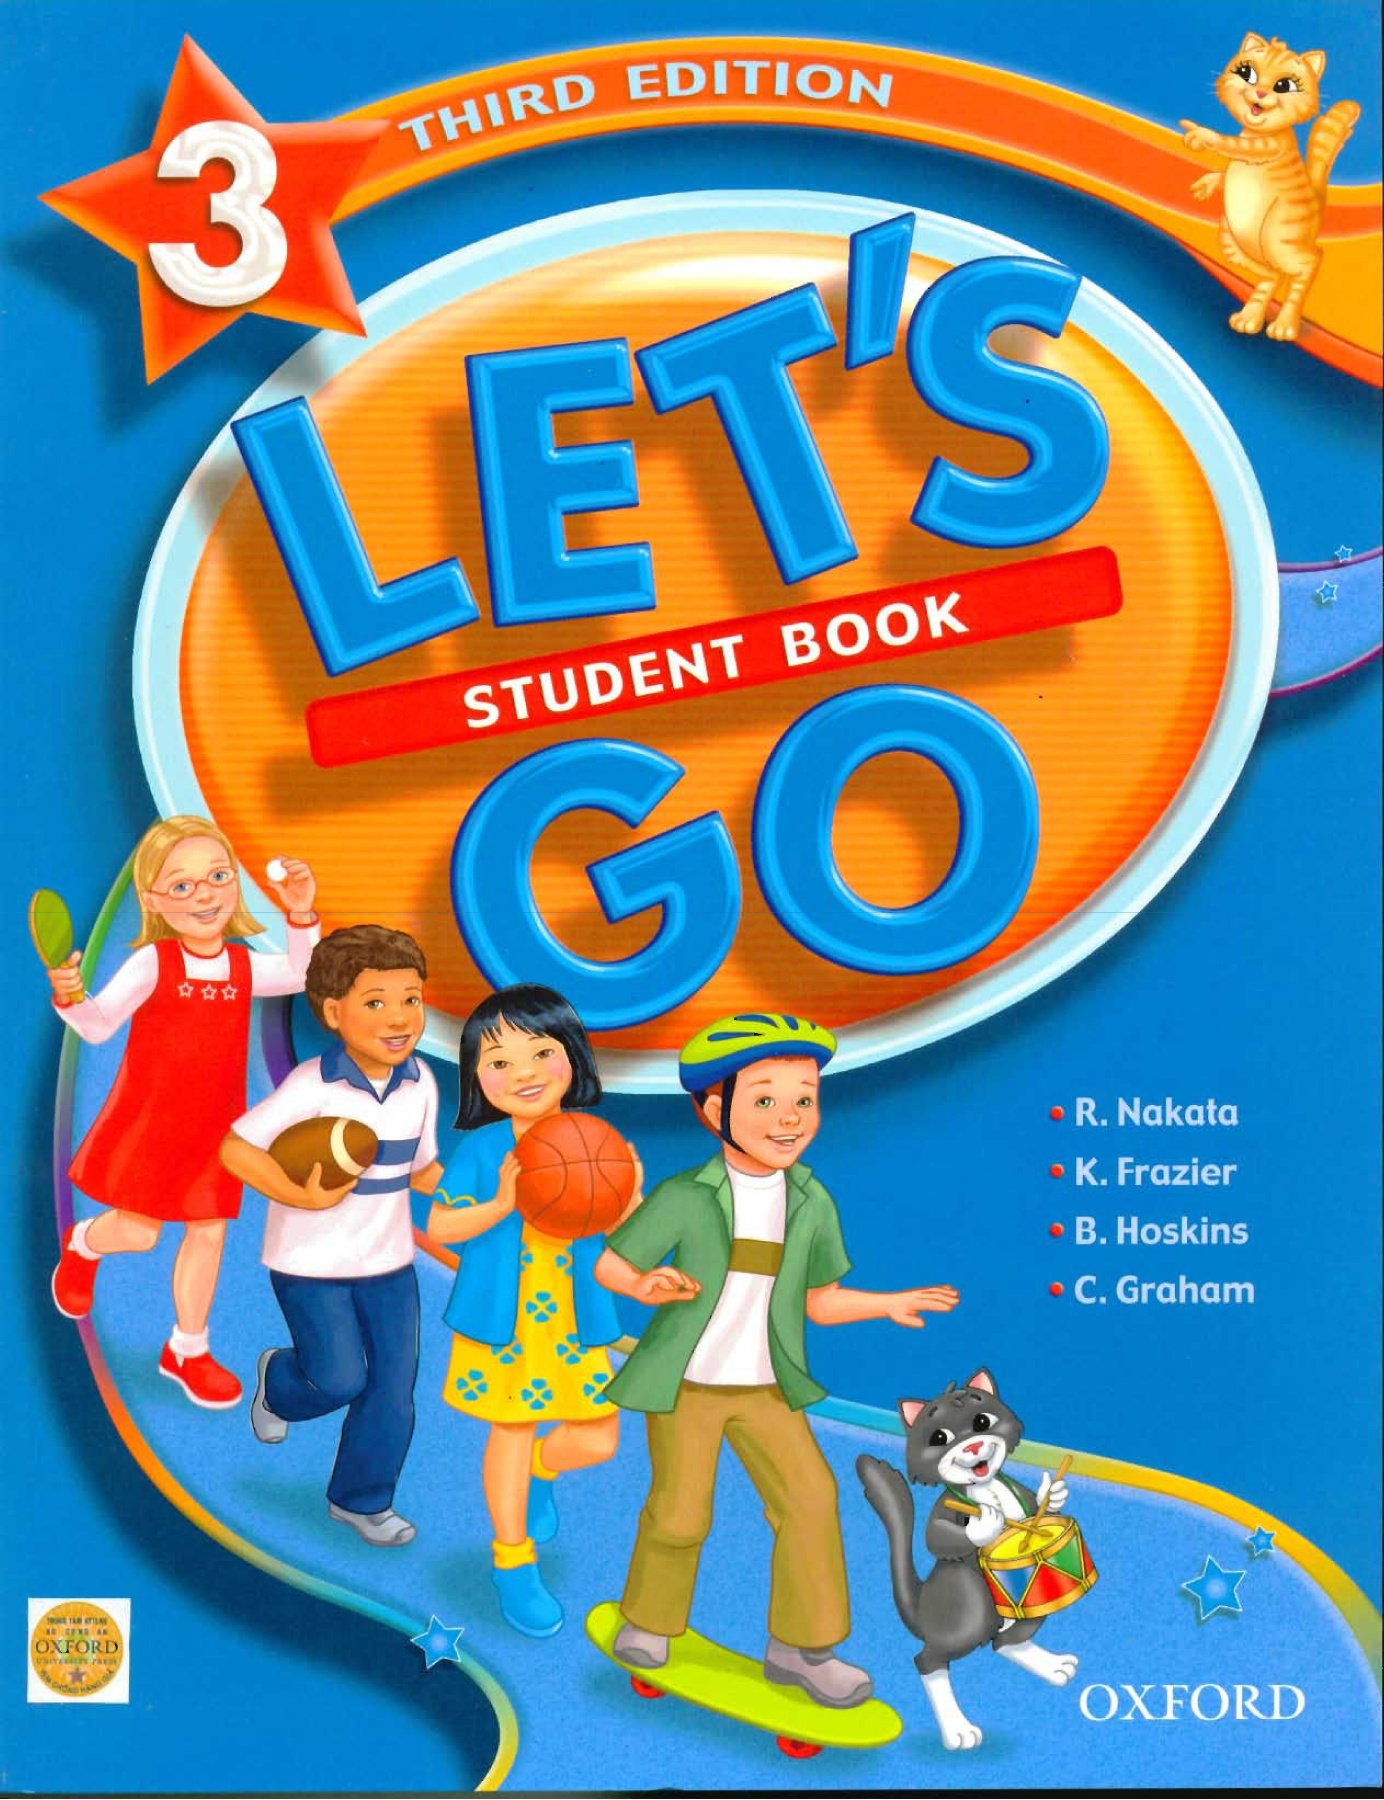 Let's Go: Level 1: Student Book (Let's Go)